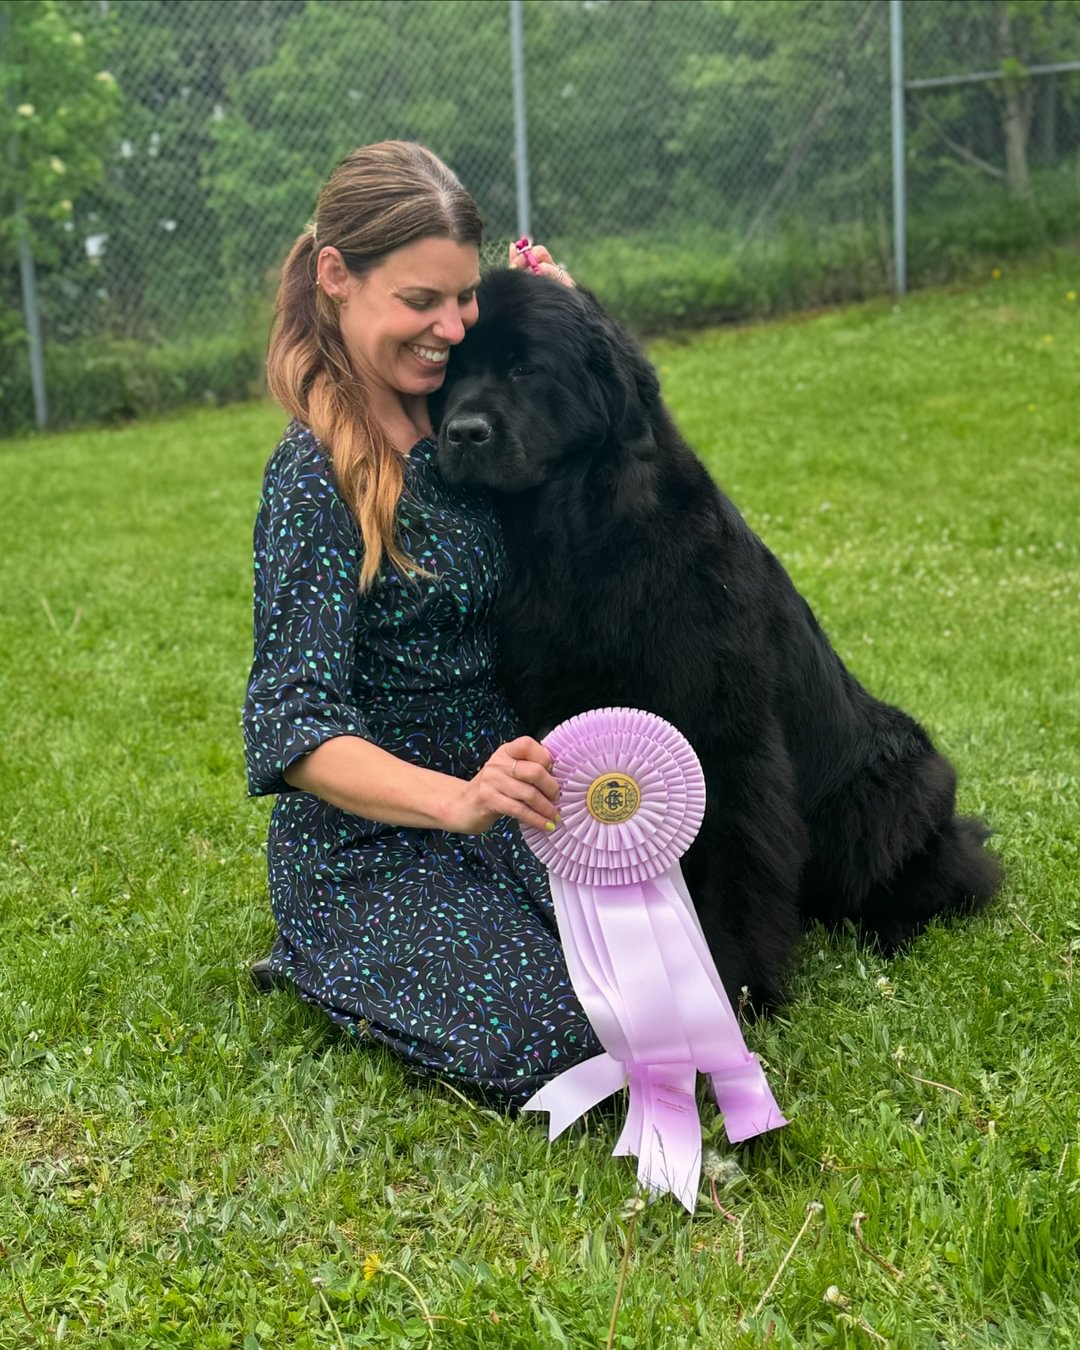 Newest Champion in our family – Olivia